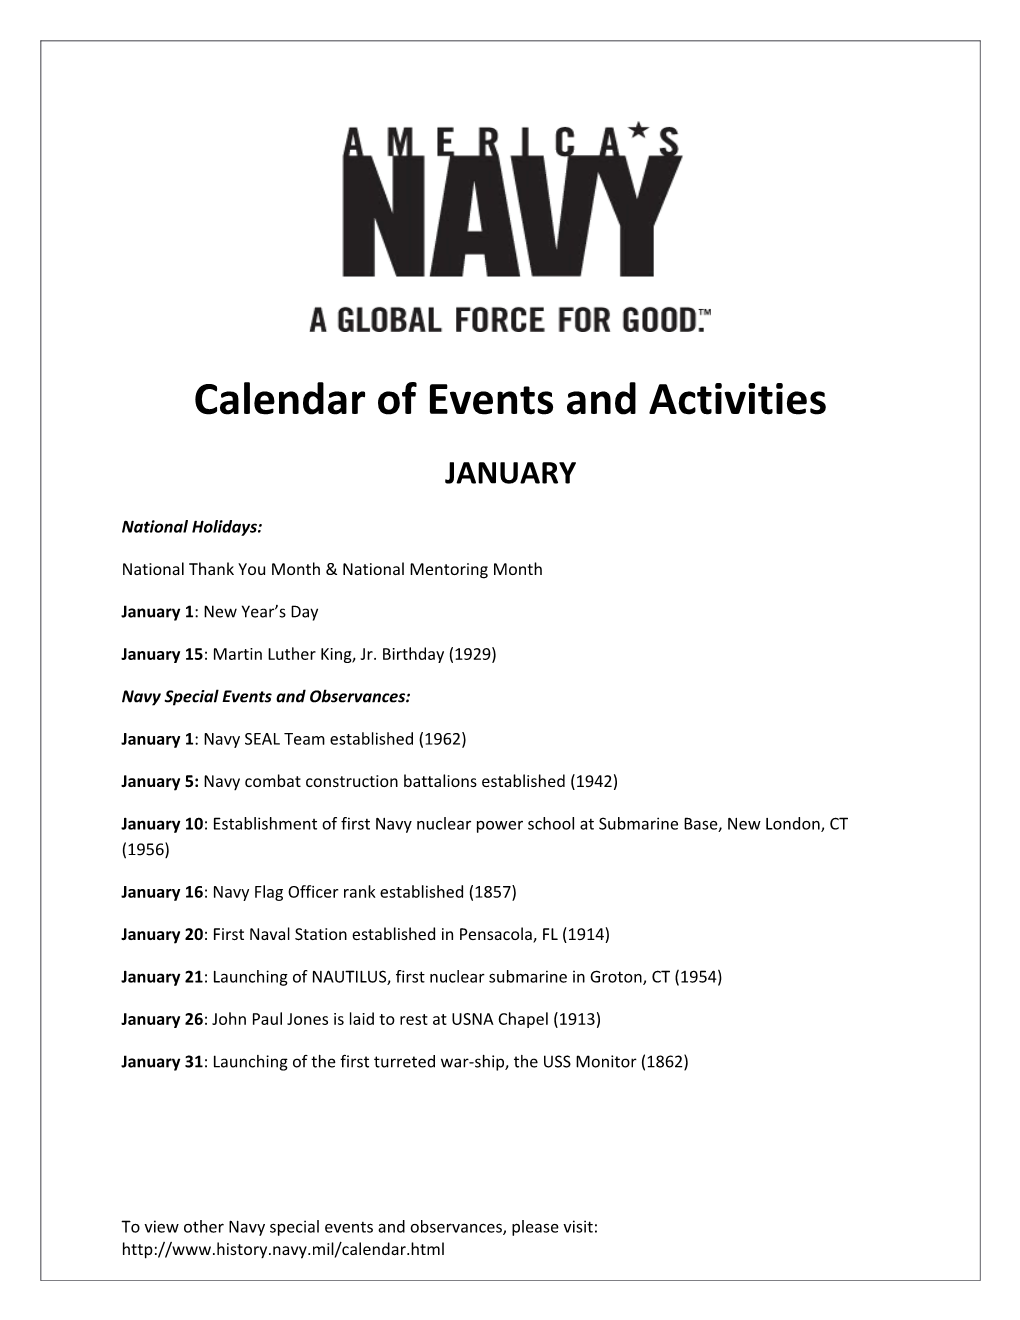 Calendar of Events and Activities